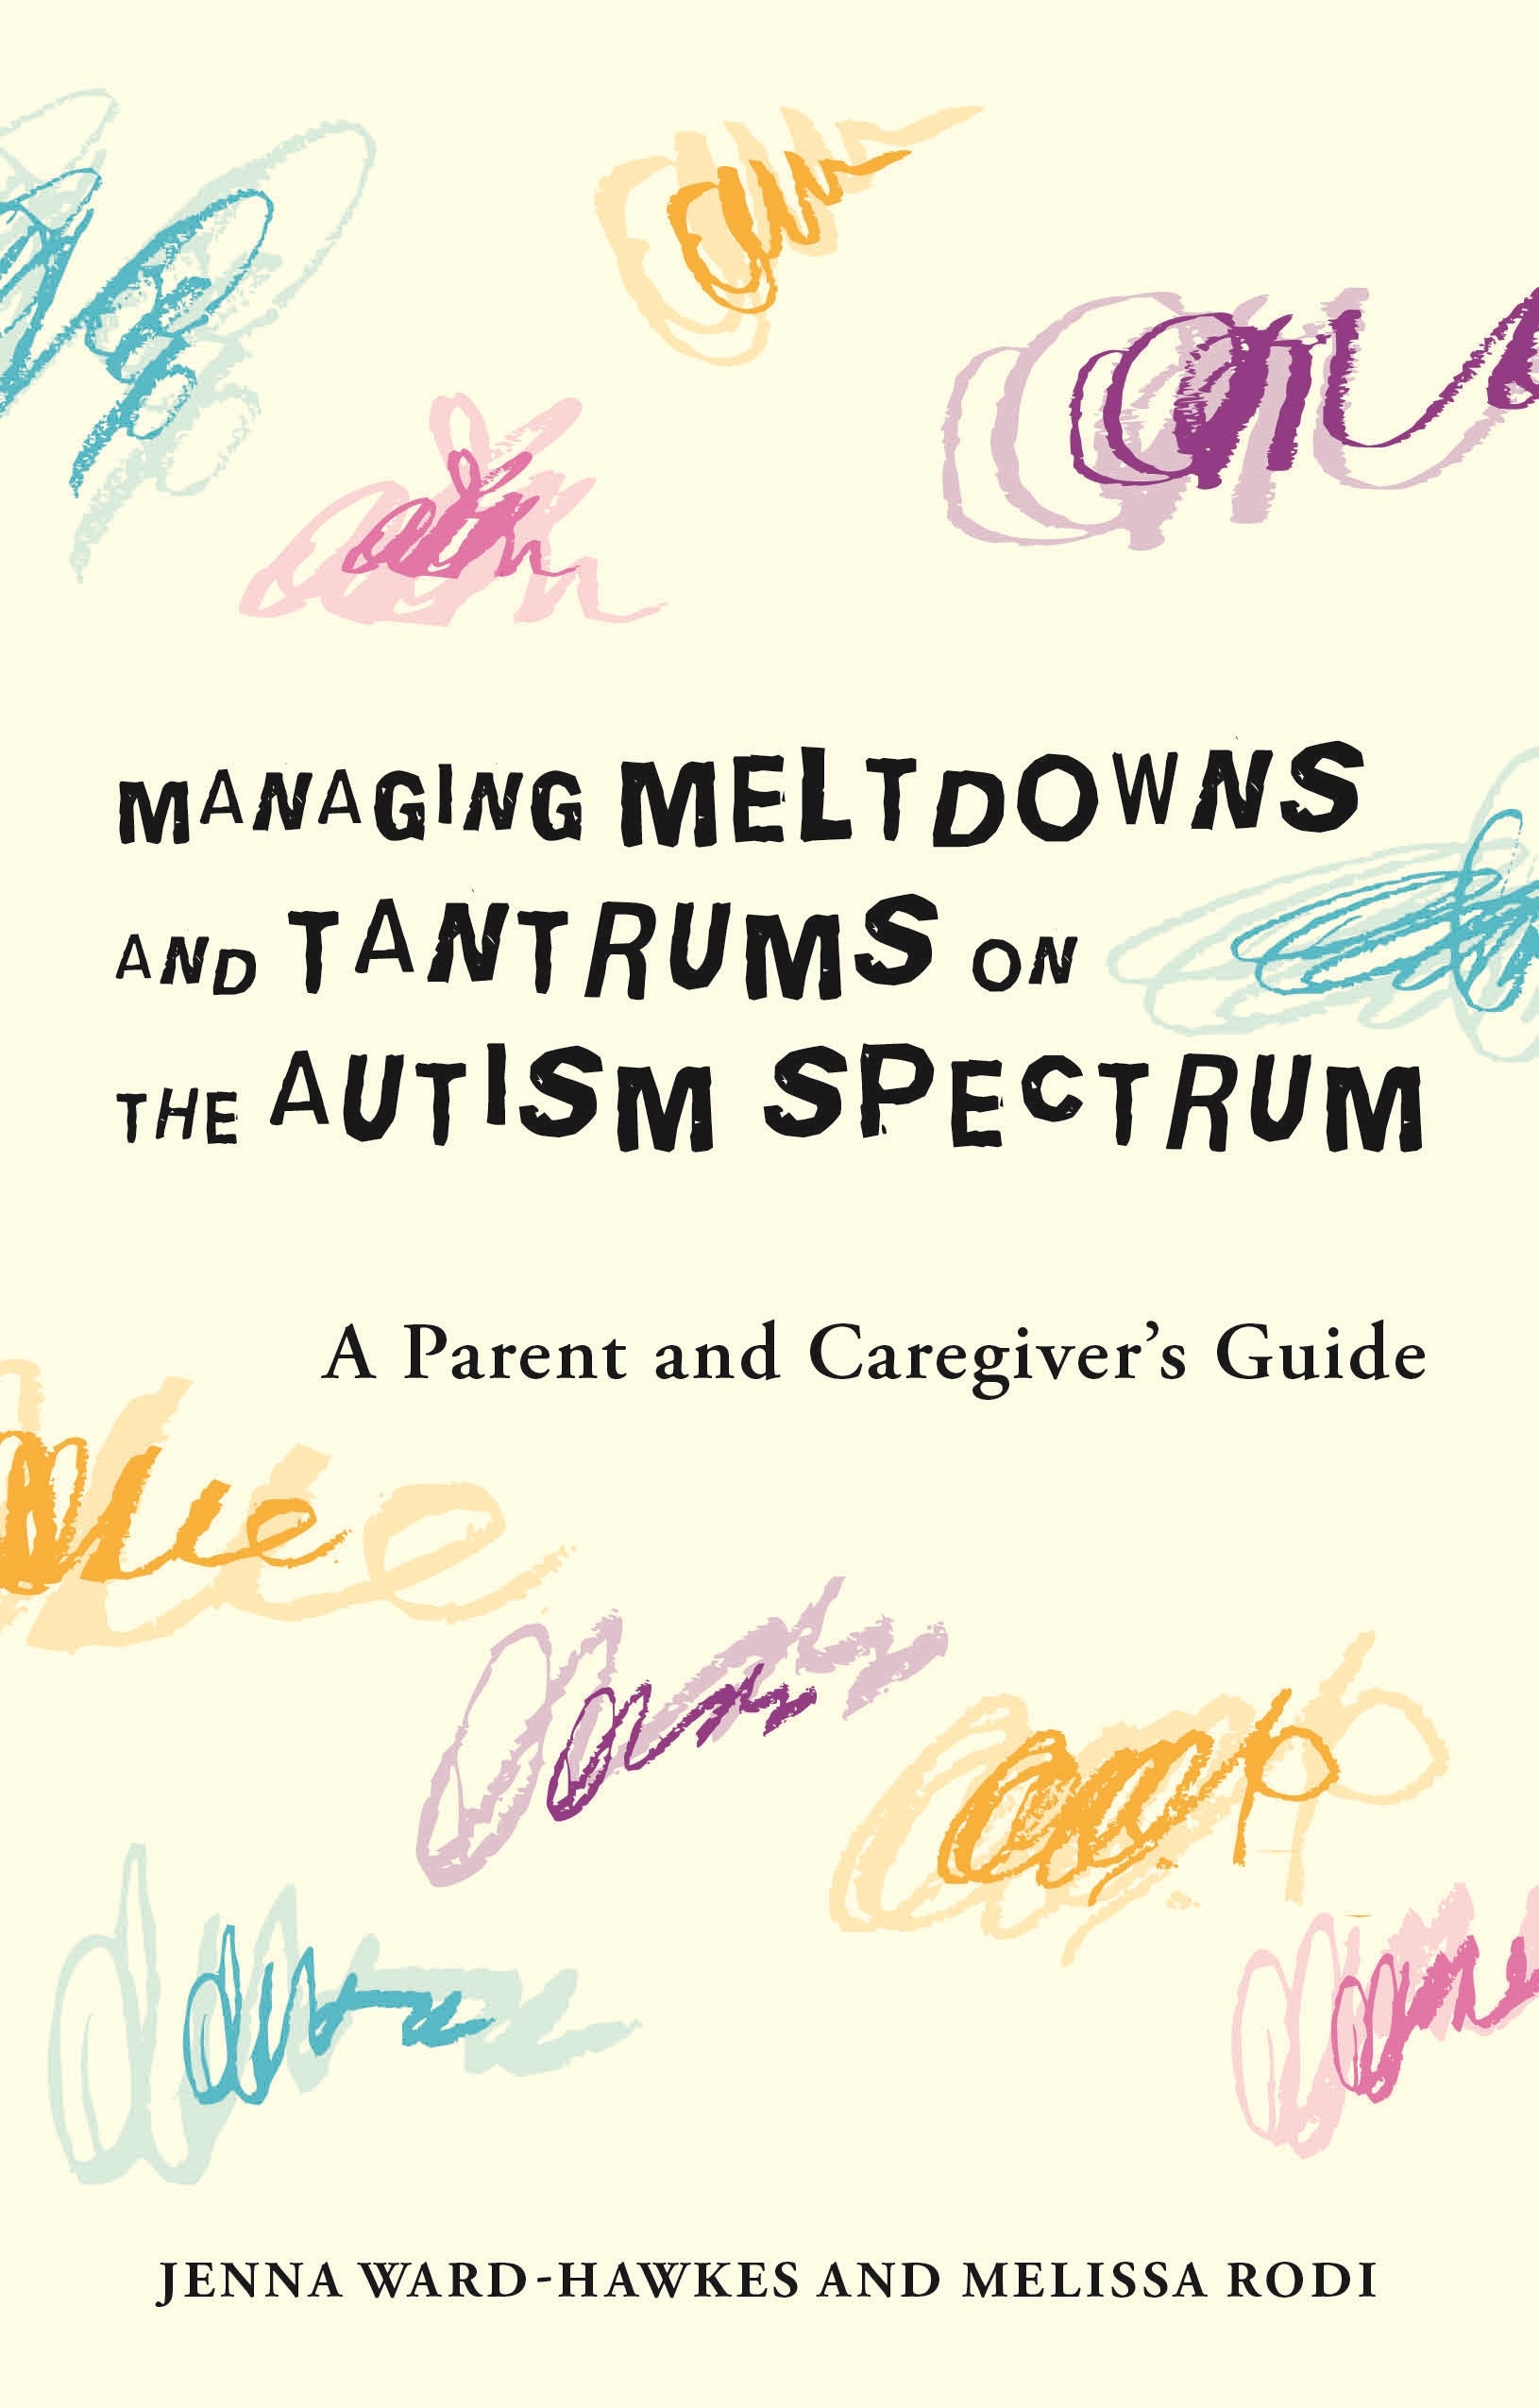 Managing Meltdowns and Tantrums on the Autism Spectrum by Jenna Ward-Hawkes, Melissa Rodi, Paul Banwell